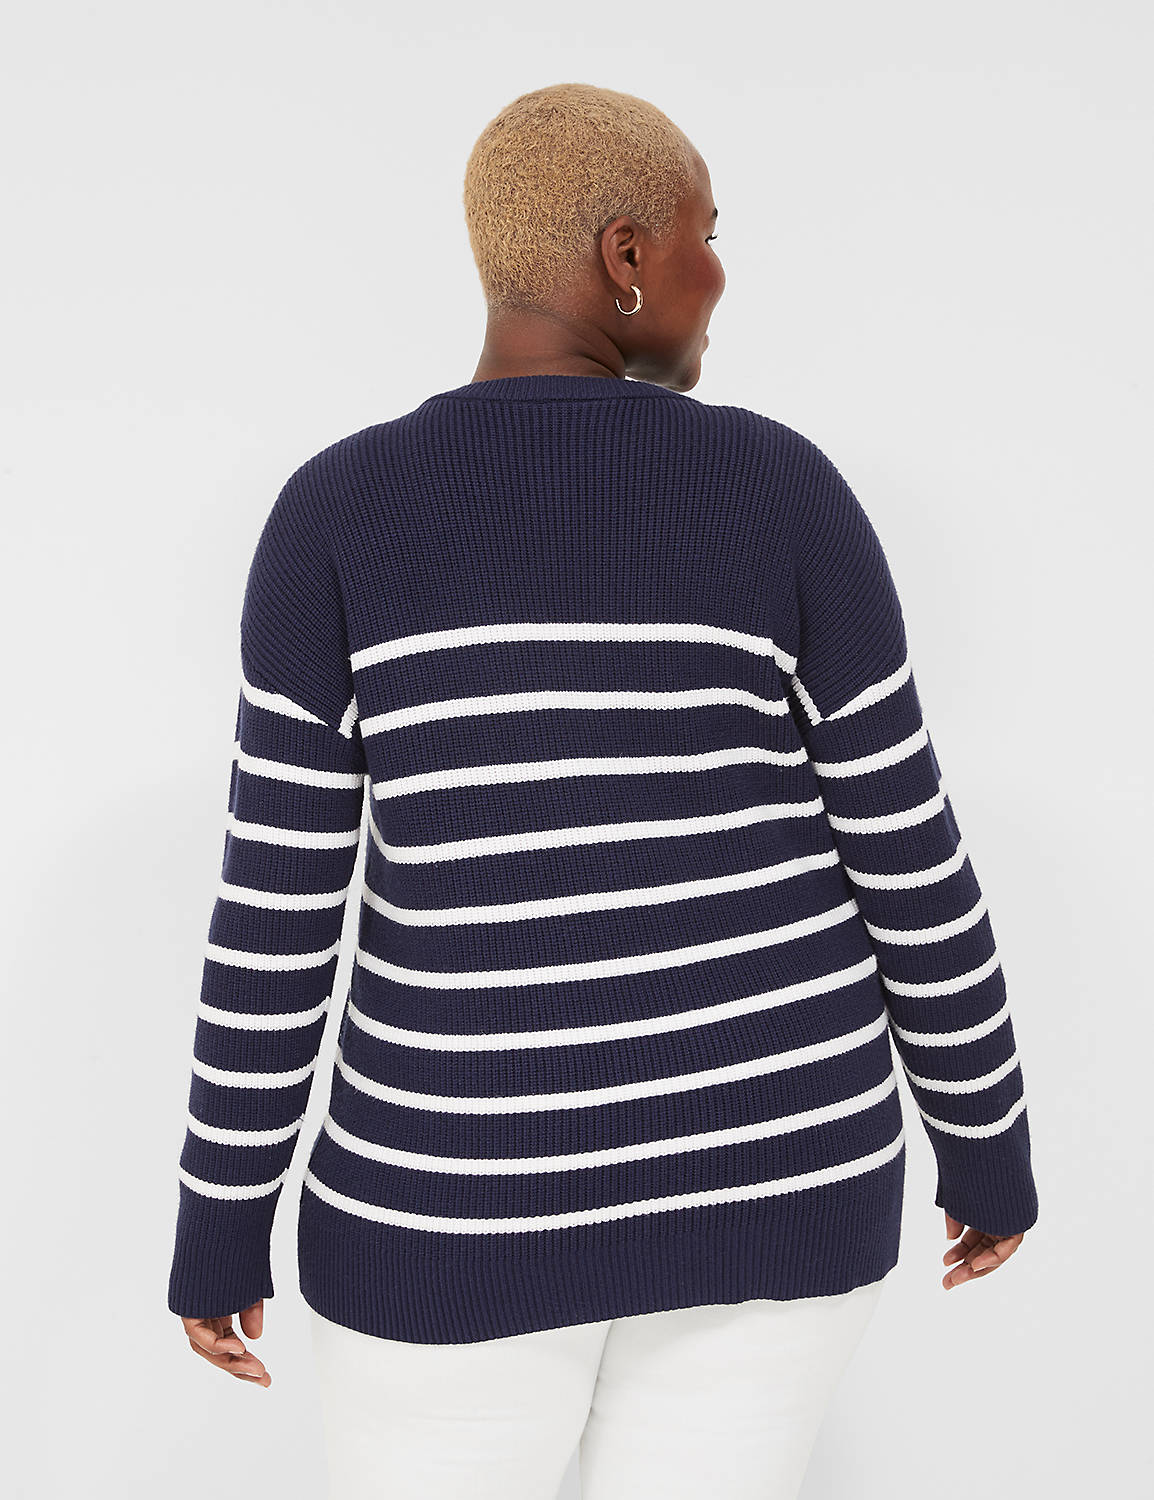 Classic Long Sleeve Button Front St Product Image 2